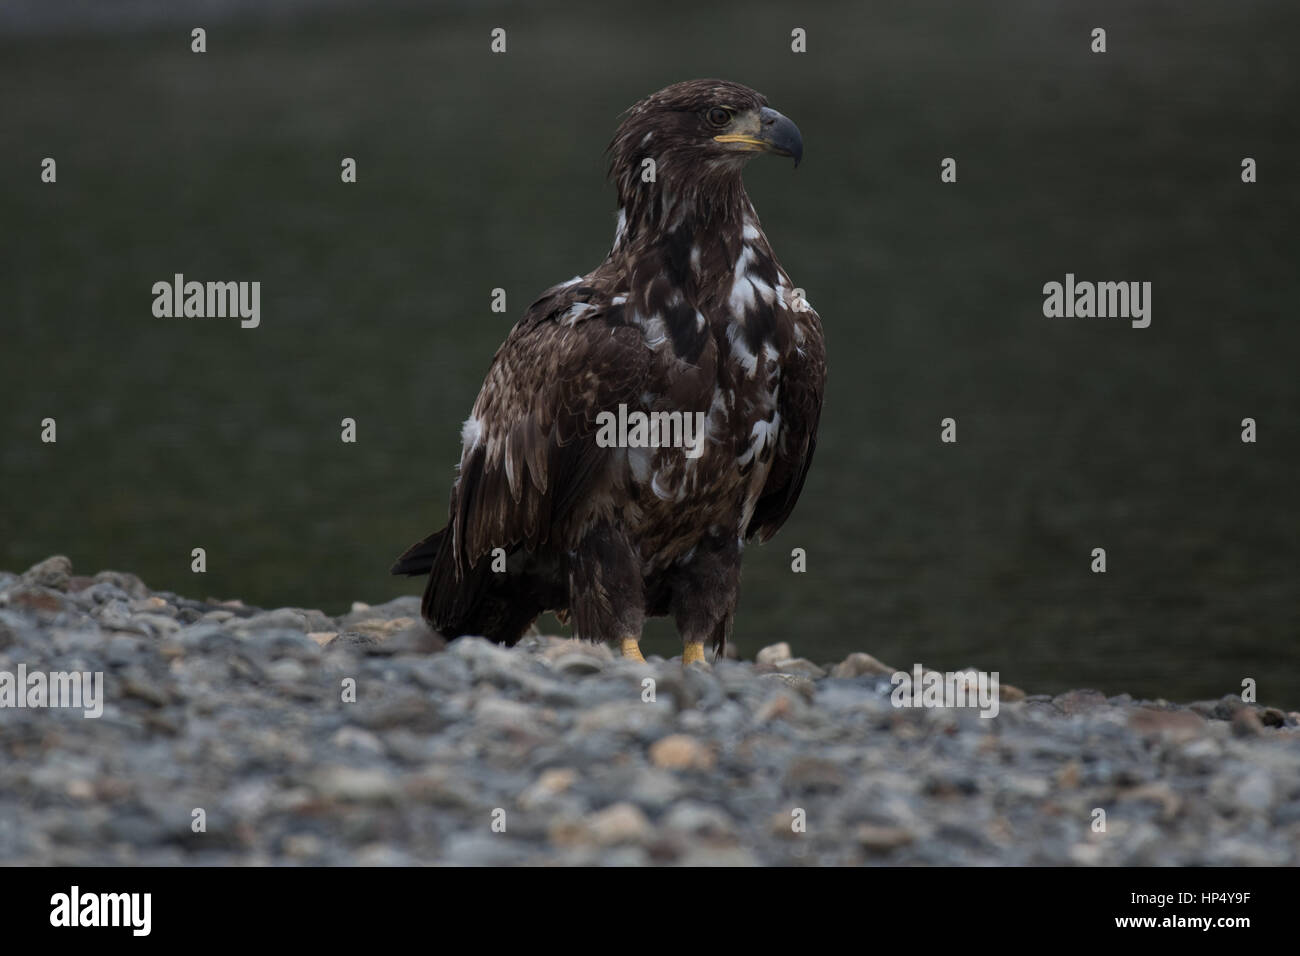 A Young/Immature Bald Eagle at A Rocky Beach Stock Photo